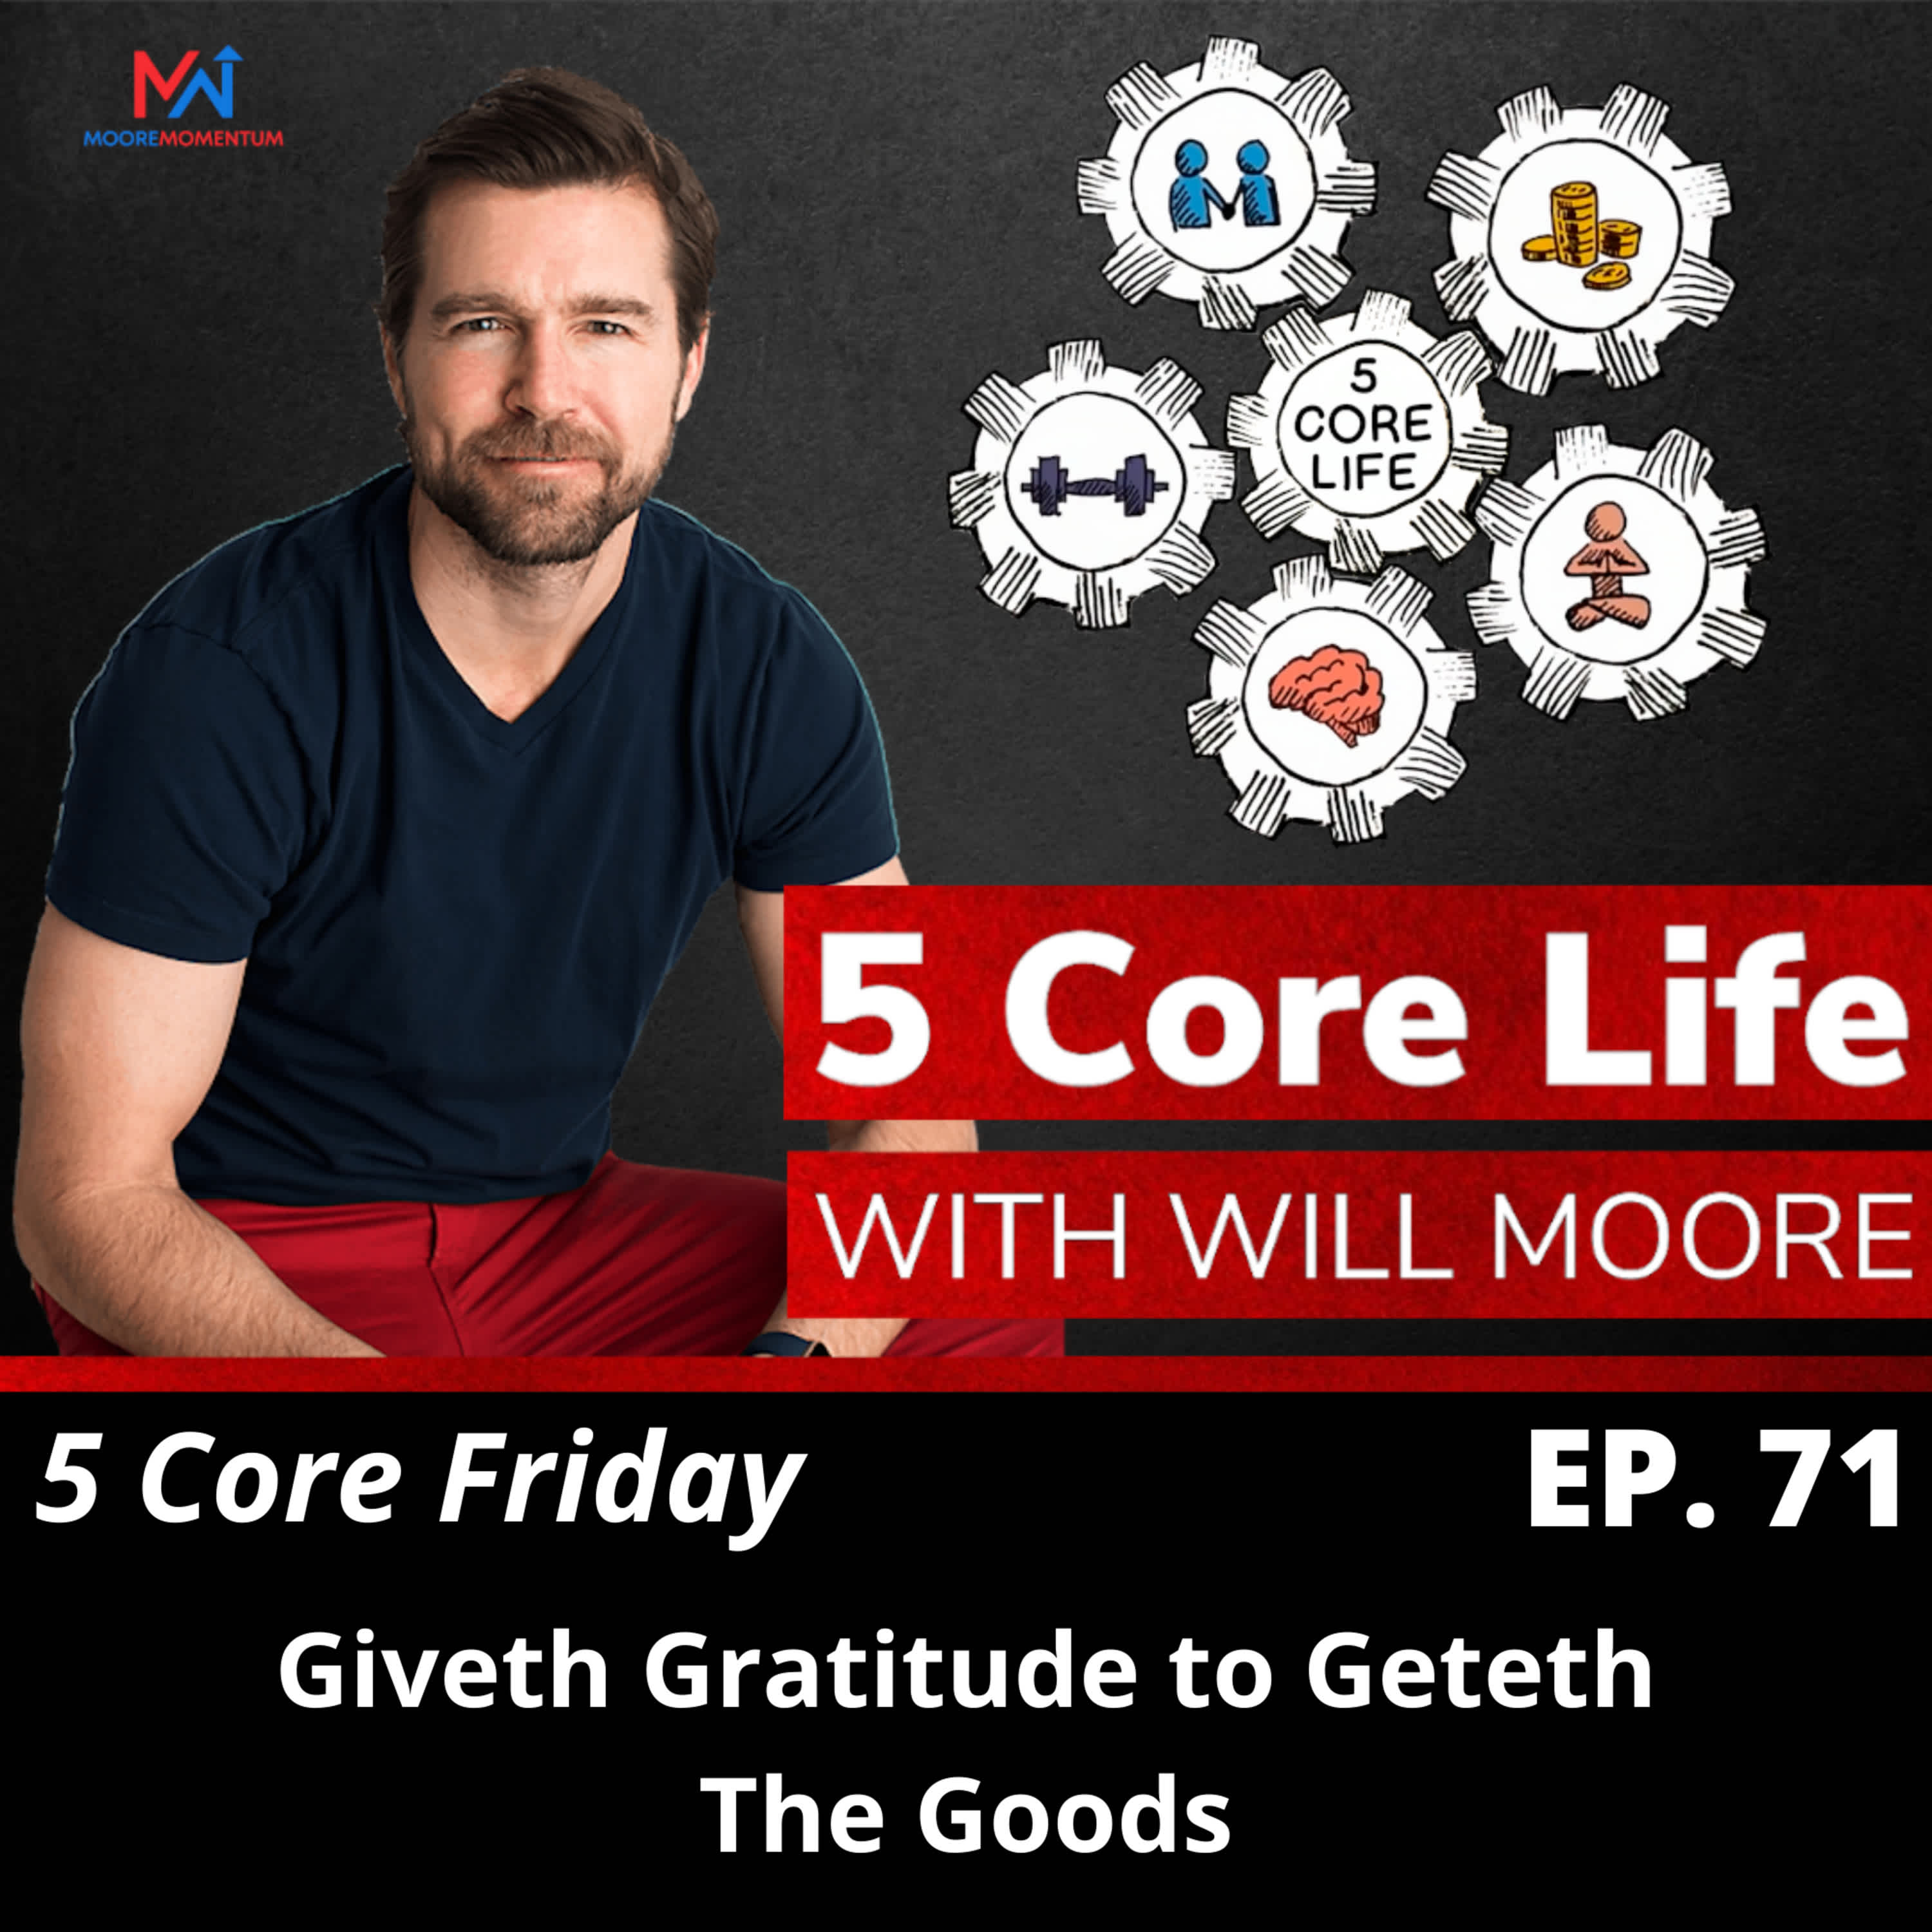 Giveth Gratitude to Geteth The Goods: 5 Core Friday